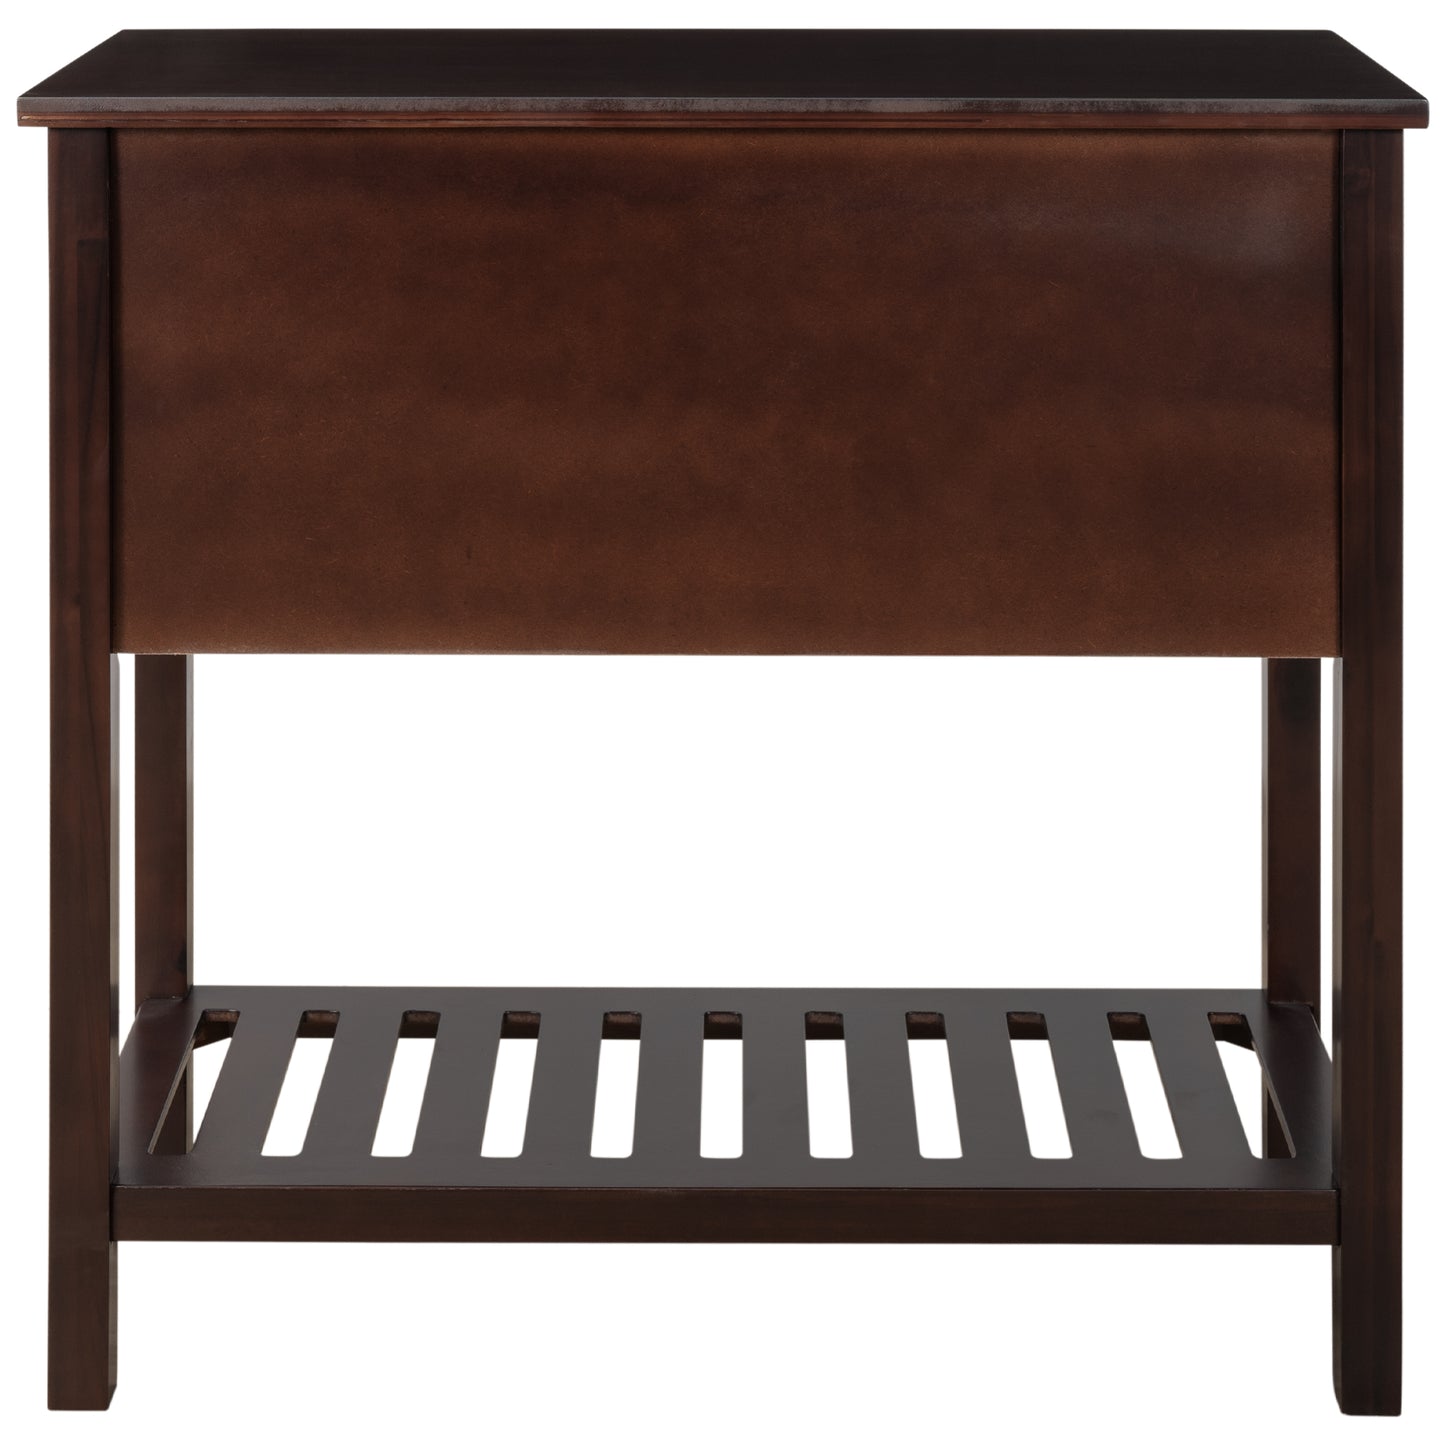 Cambridge Series Buffet Sideboard Console Table with Bottom Shelf (Espresso)